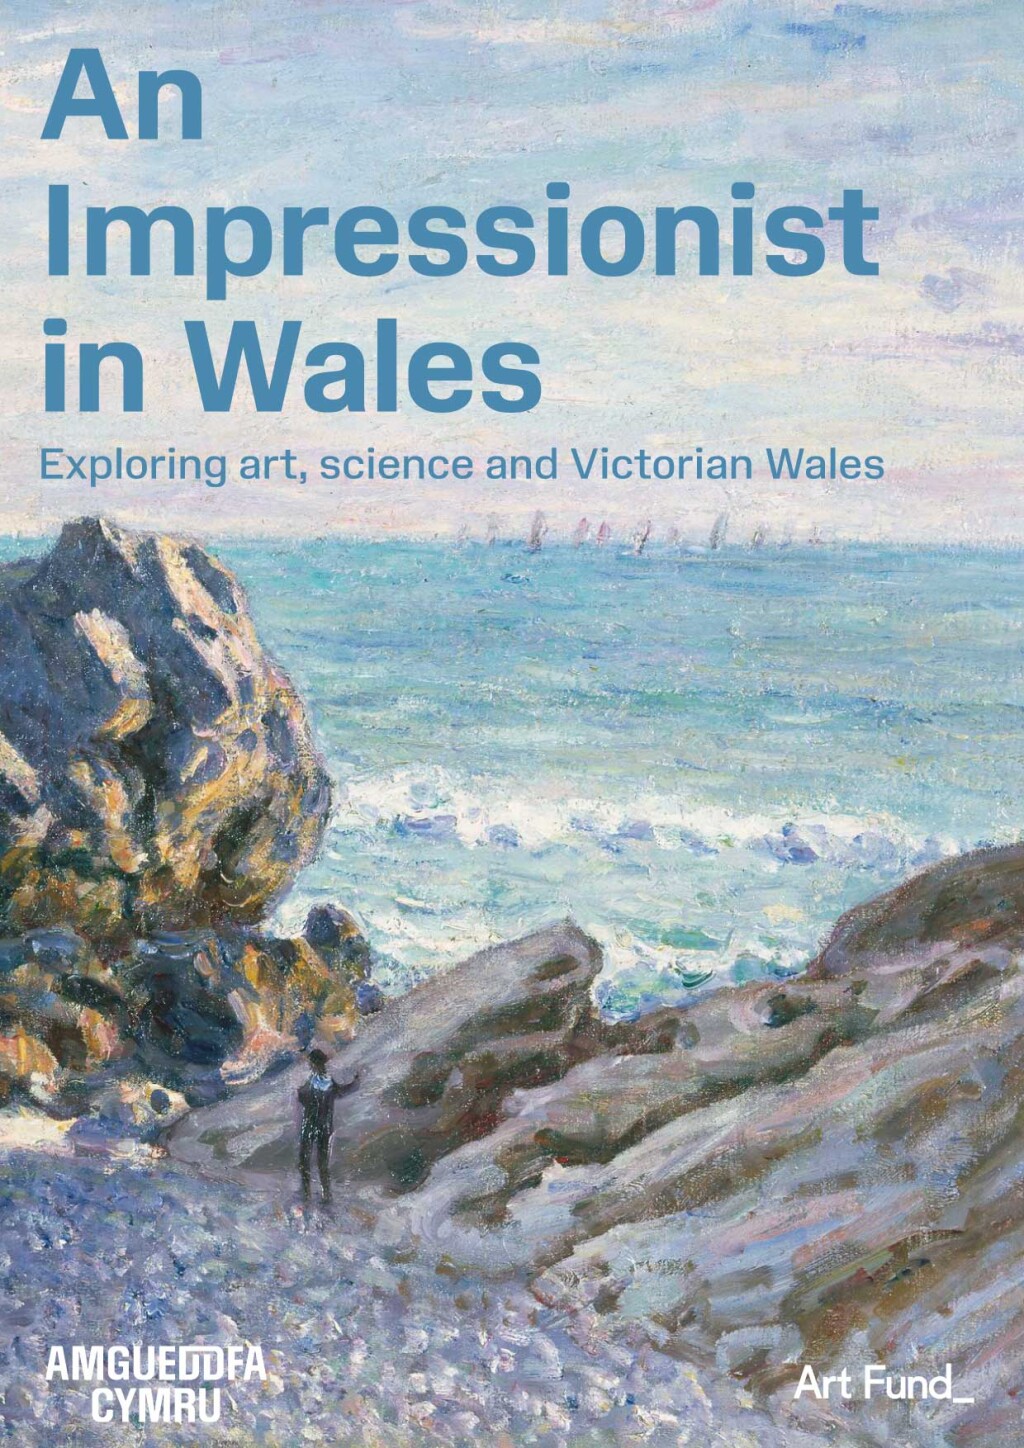 An Impressionist in Wales: Exploring art, science and Victorian Wales